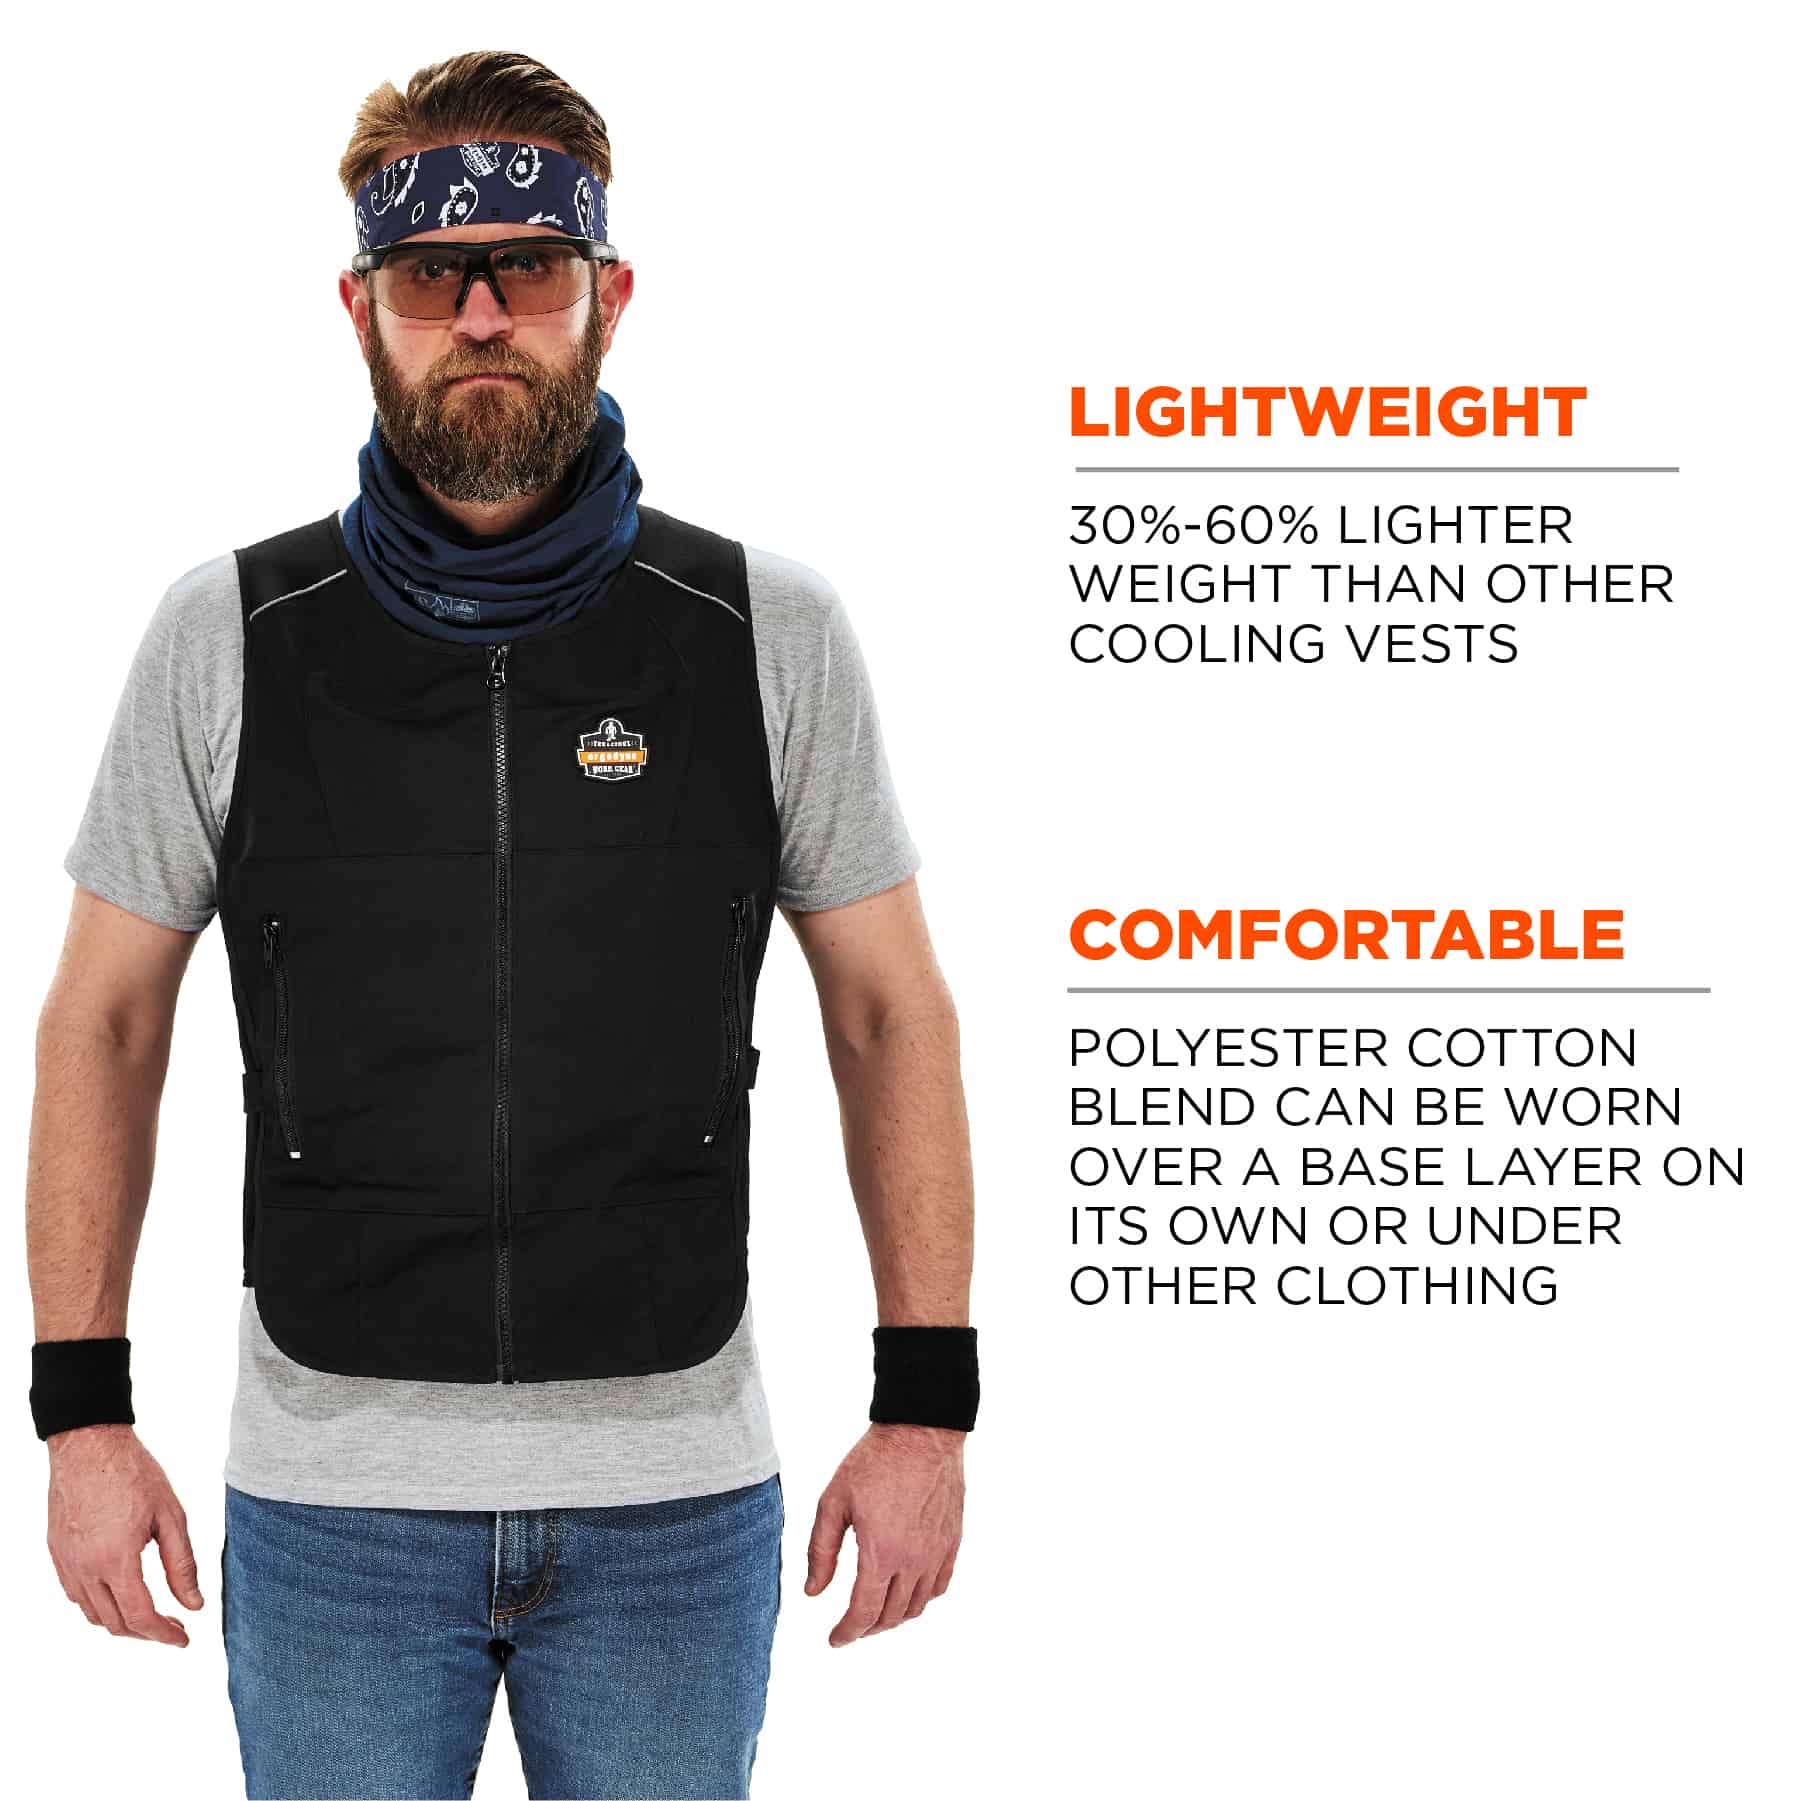 https://www.ergodyne.com/sites/default/files/product-images/12133-6260-lightweight-phase-change-cooling-vest-with-packs-lightweight-and-comfortable.jpg